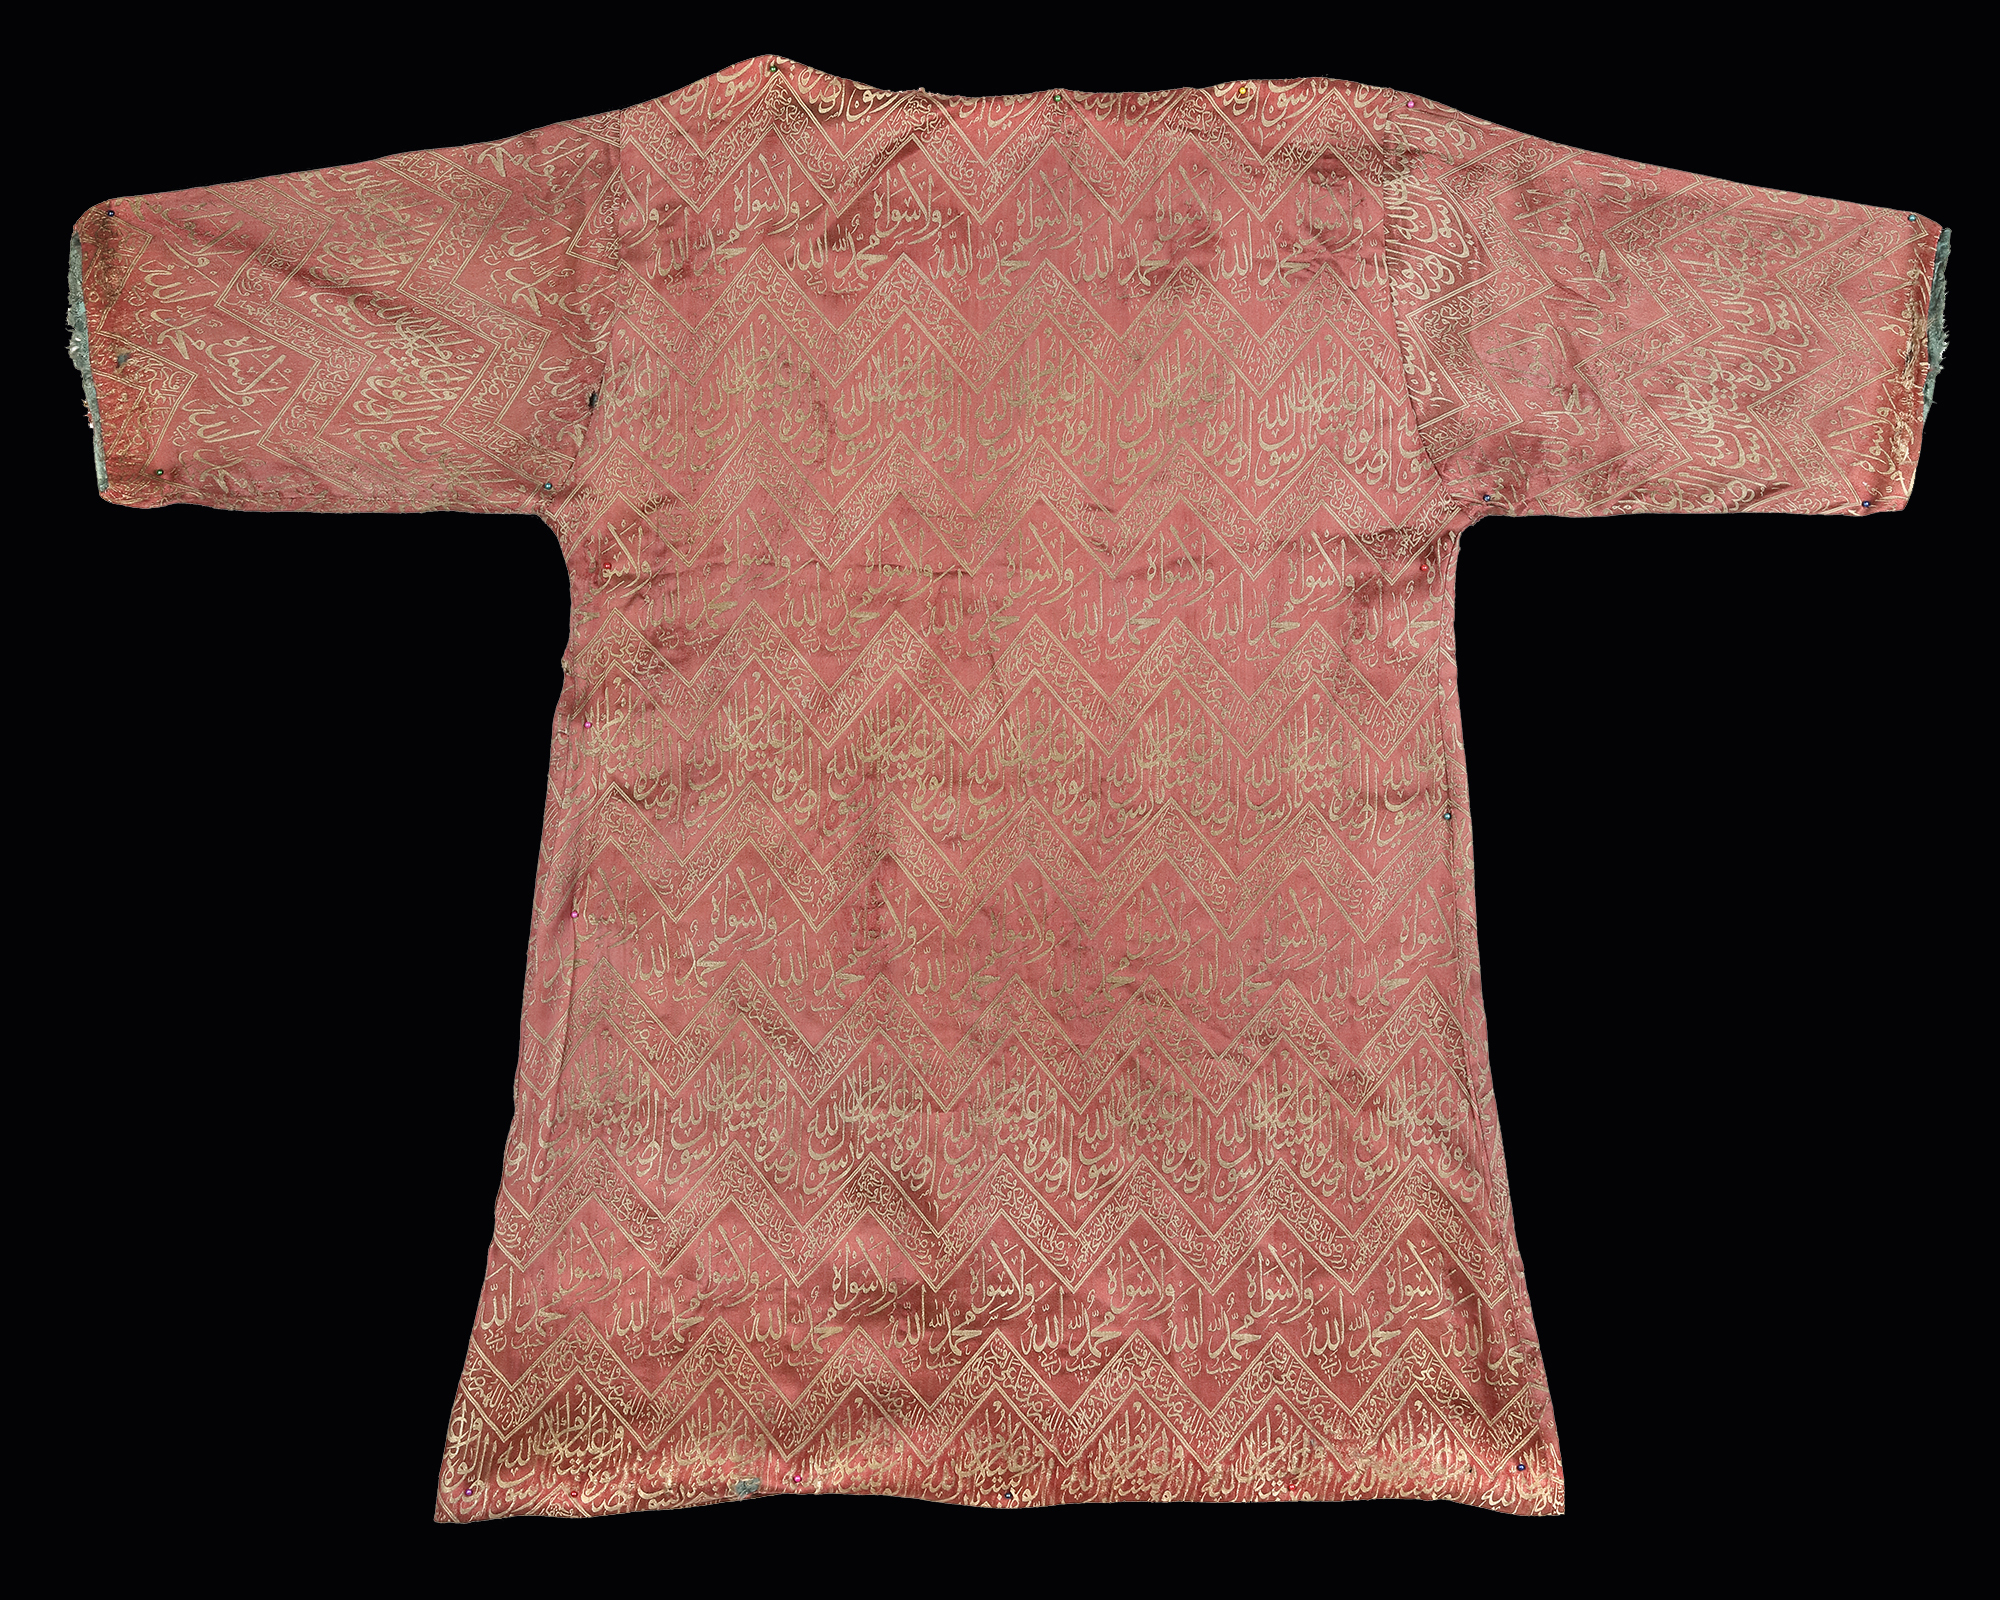 AN OTTOMAN LAMPAS-WEAVE TUNIC MADE FROM A CENOTAPH COVER, TURKEY, LATE 19TH CENTURY - Image 3 of 4